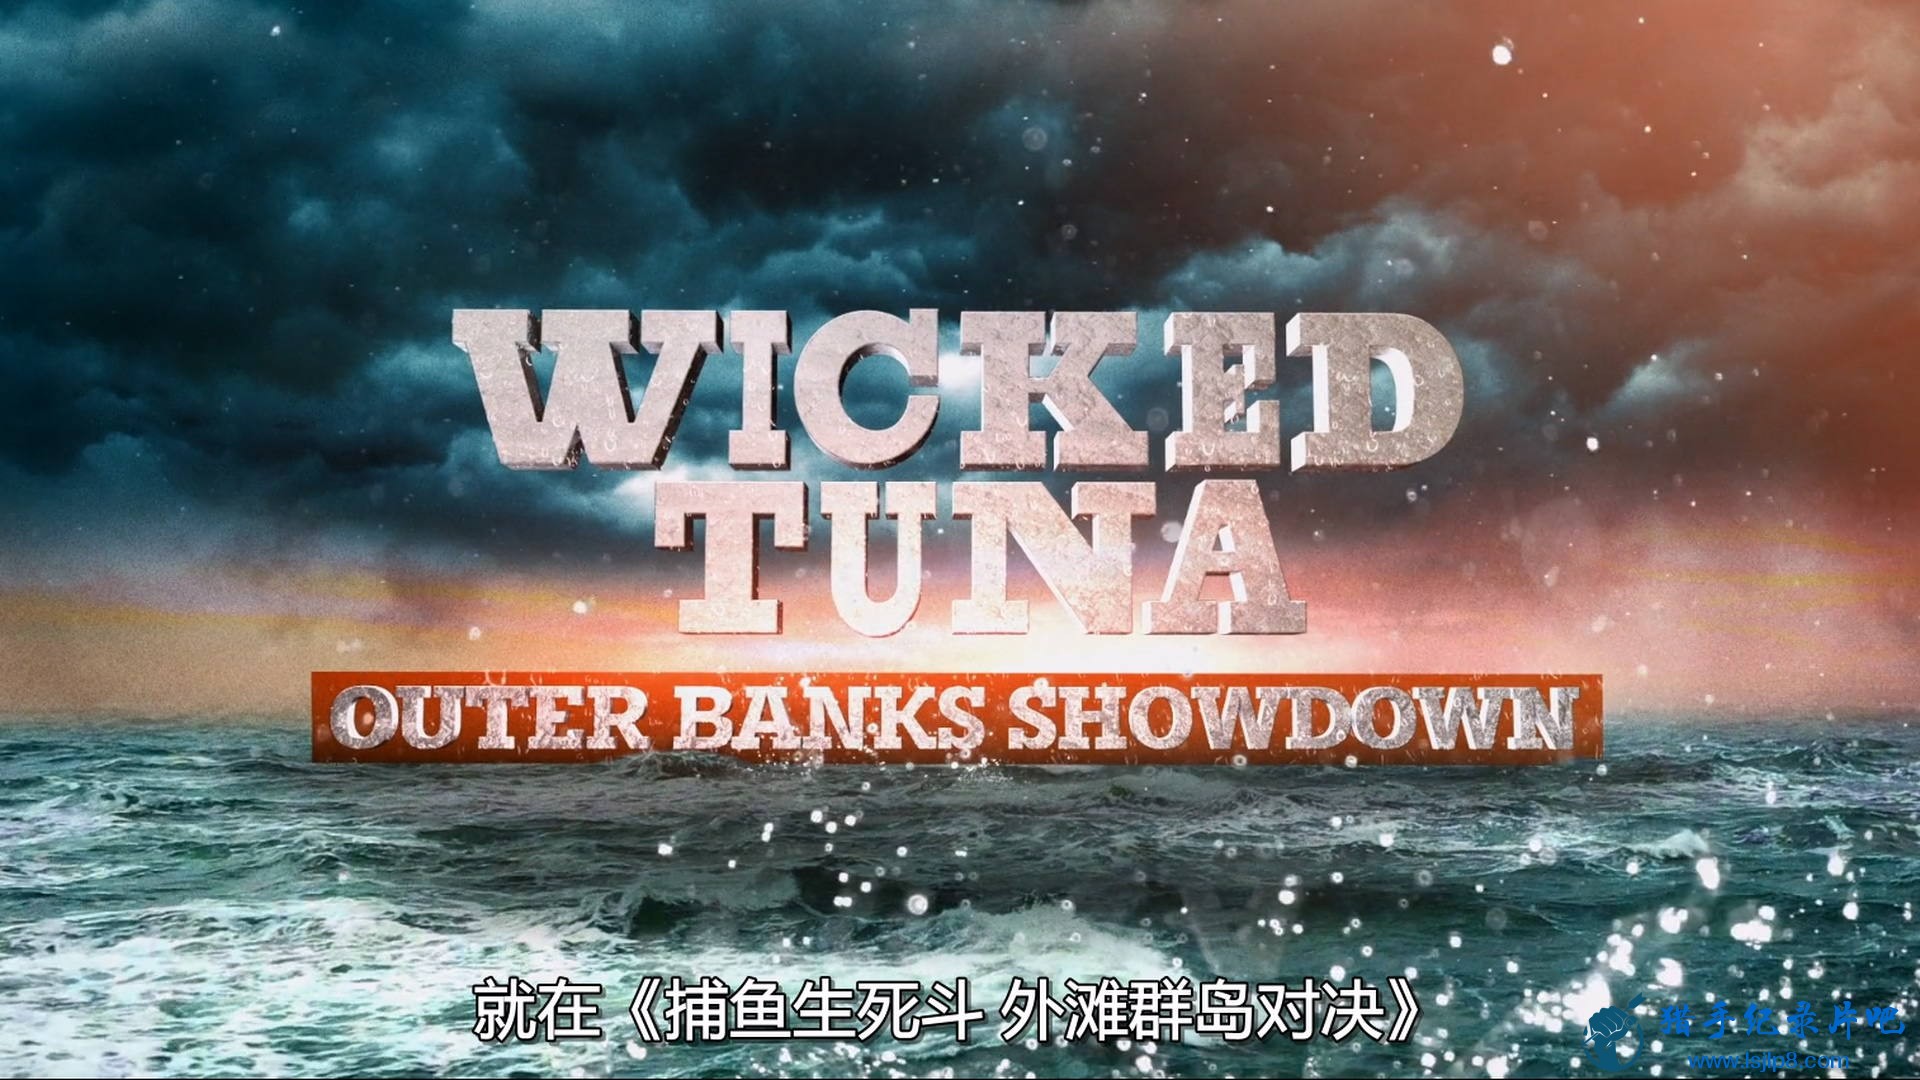 Wicked.Tuna.Outer.Banks.Showdown.S01E01.1080p.DSNP.WEB-DL.AAC2.0.H.264-NTb.jpg